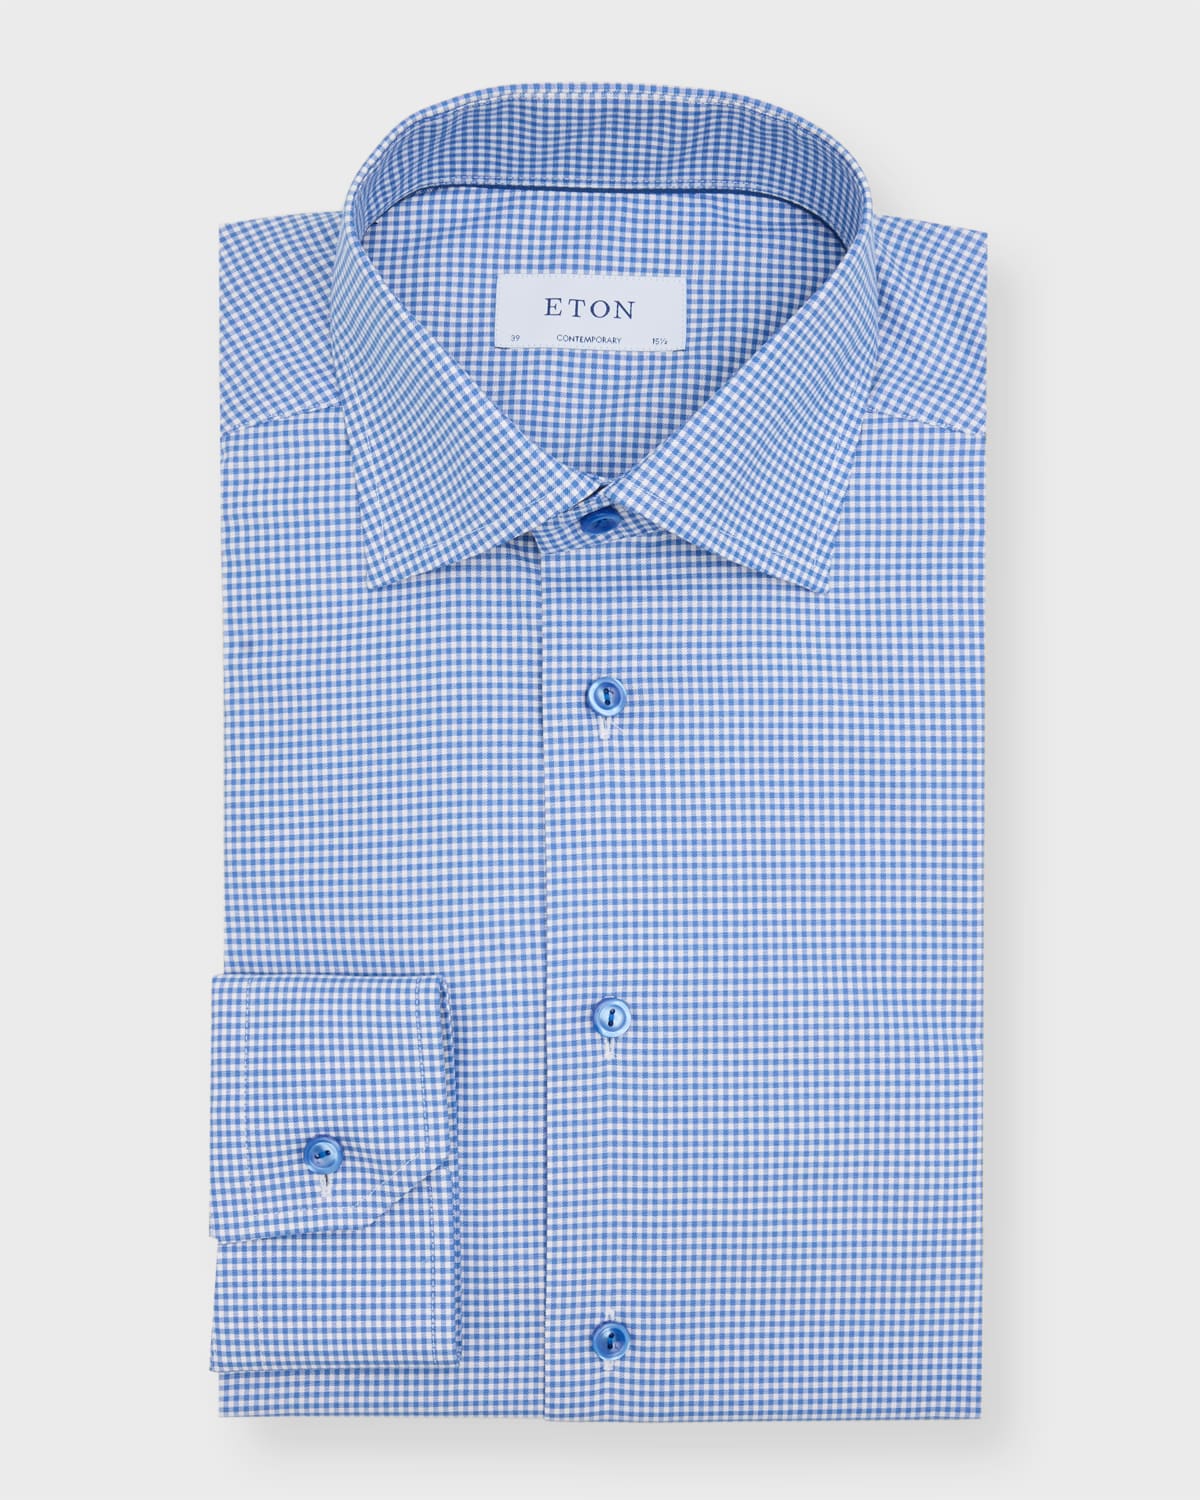 Men's Contemporary Fit Micro-Check Dress Shirt